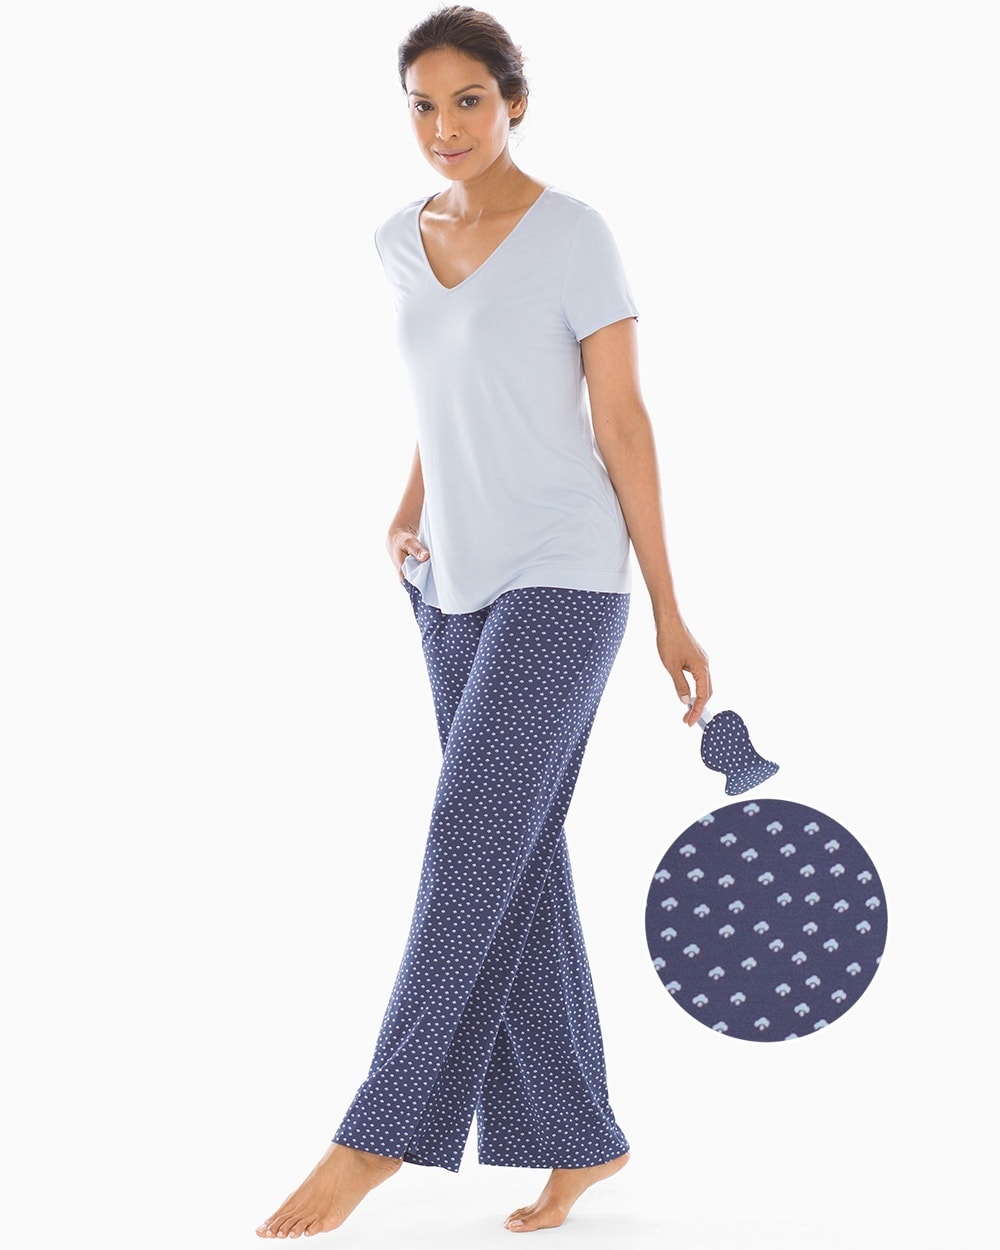 Cool Nights V-Neck Short Sleeve Pajama Set with Eyemask Airy Dot with Ocean Air RG